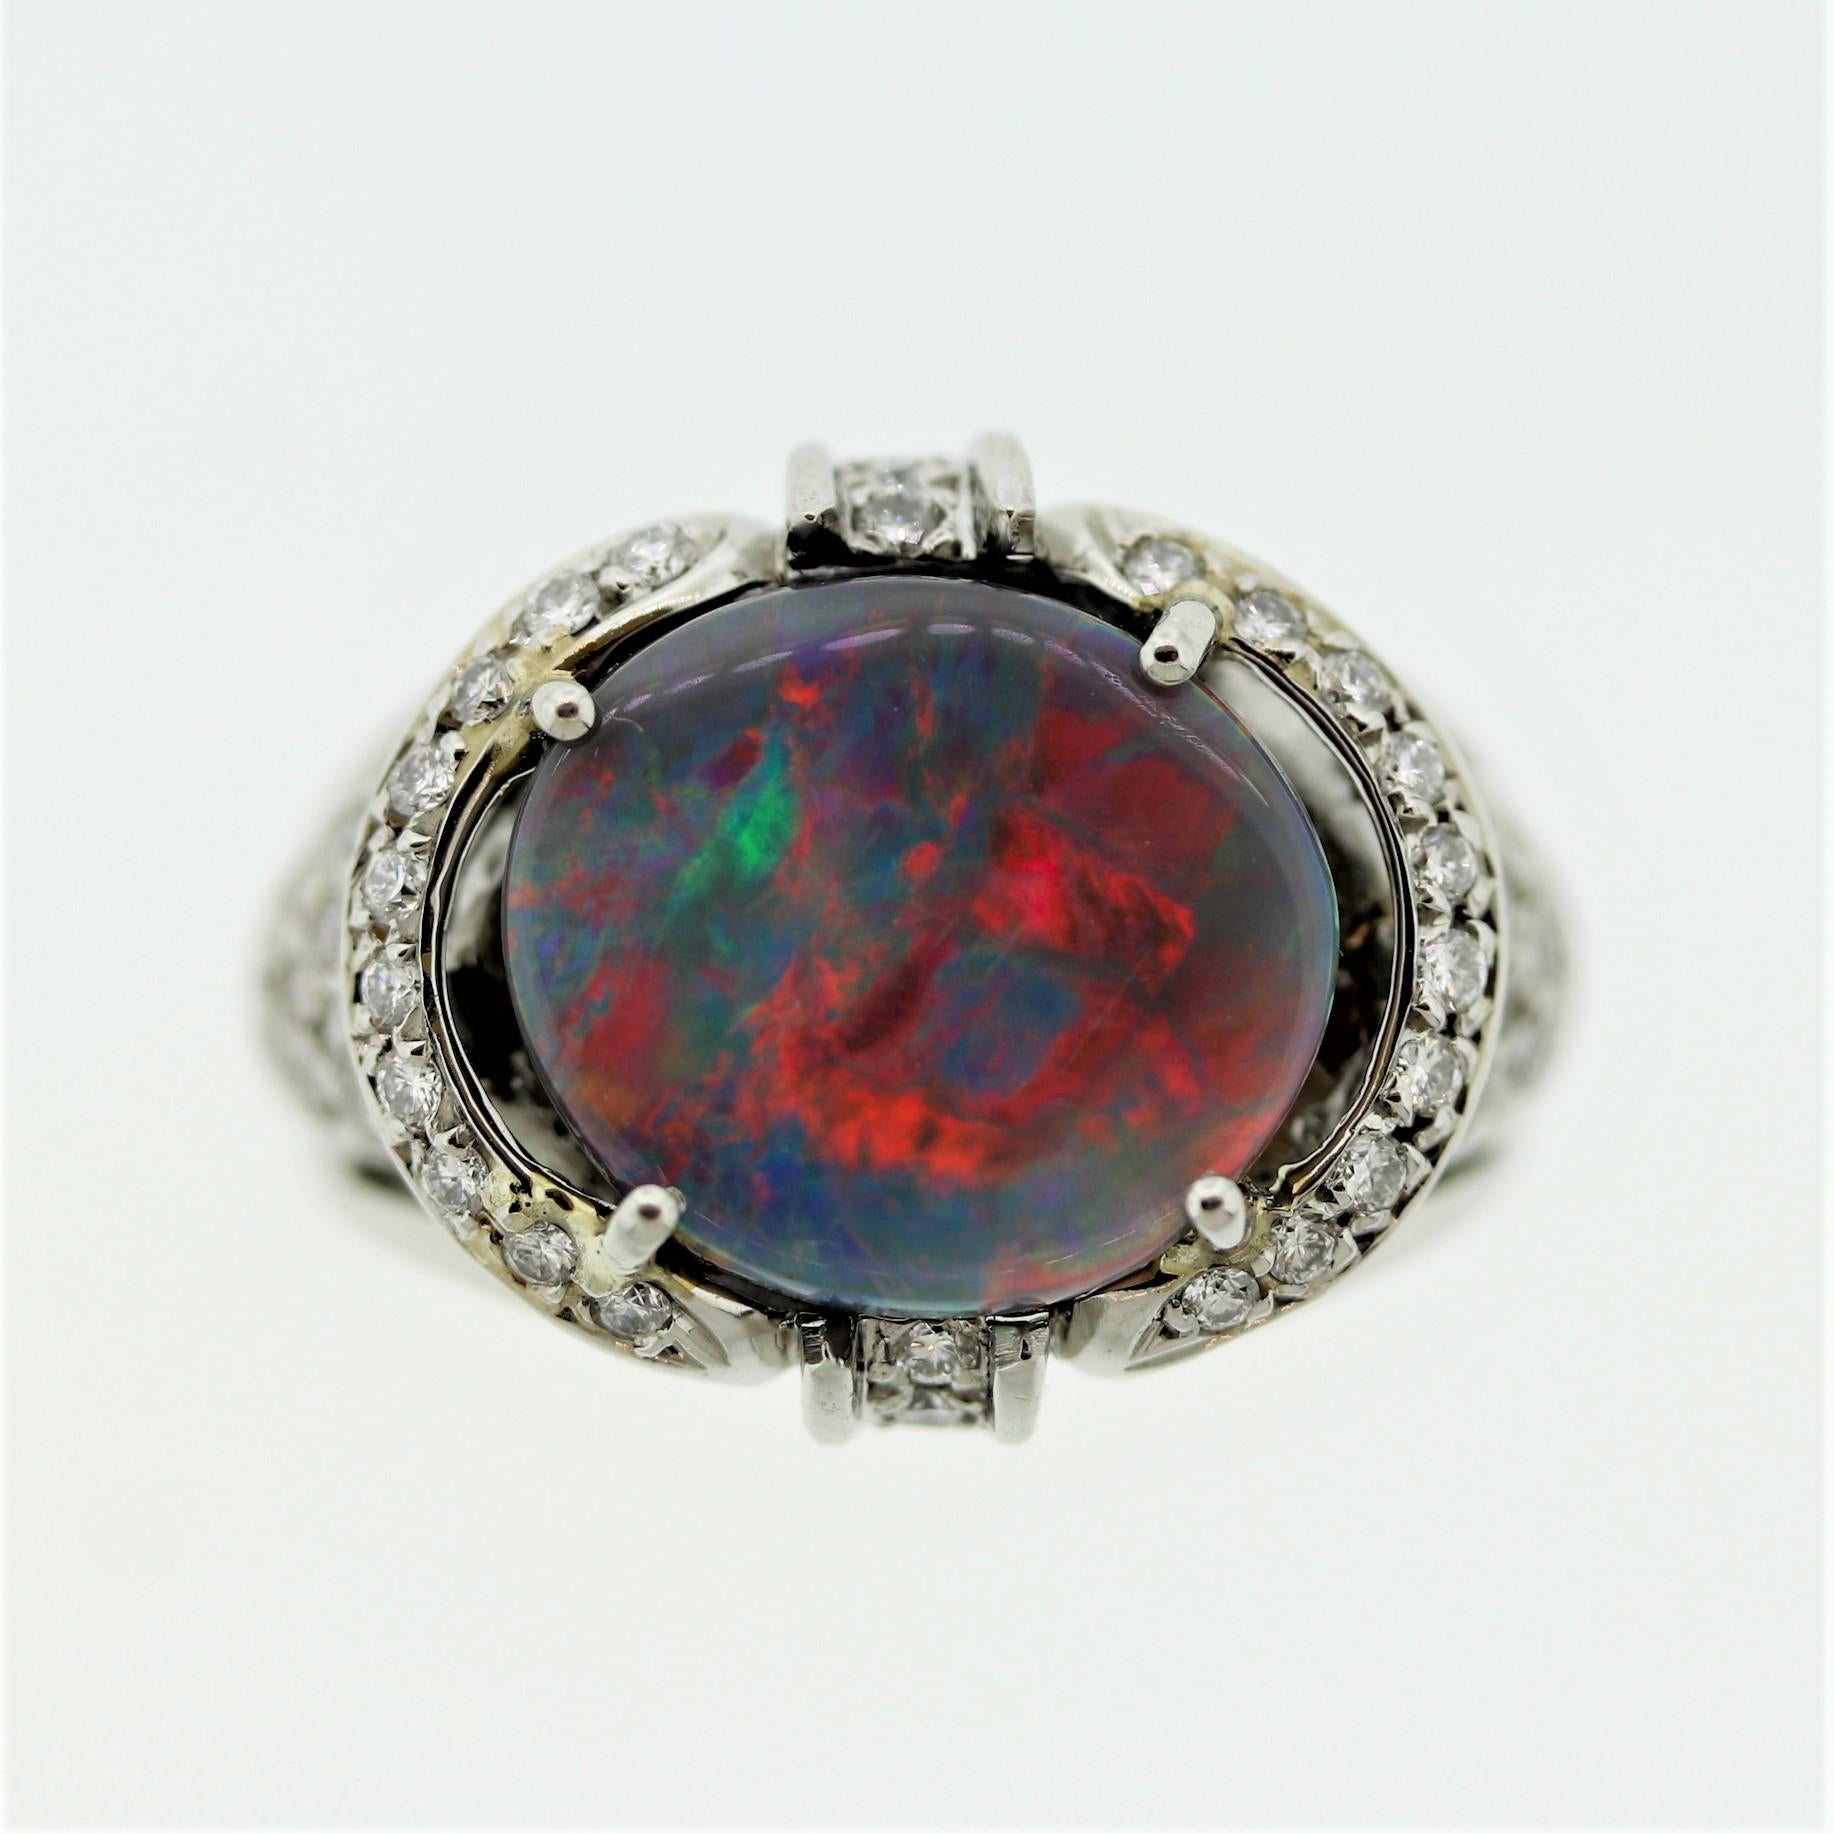 A classic Australian black opal with top-quality play of color! The 3.21 carat opal shows bright flashes of predominantly reds along with oranges, blues, and greens. A true beauty, it is accented by 0.46 carats of round brilliant-cut diamonds which